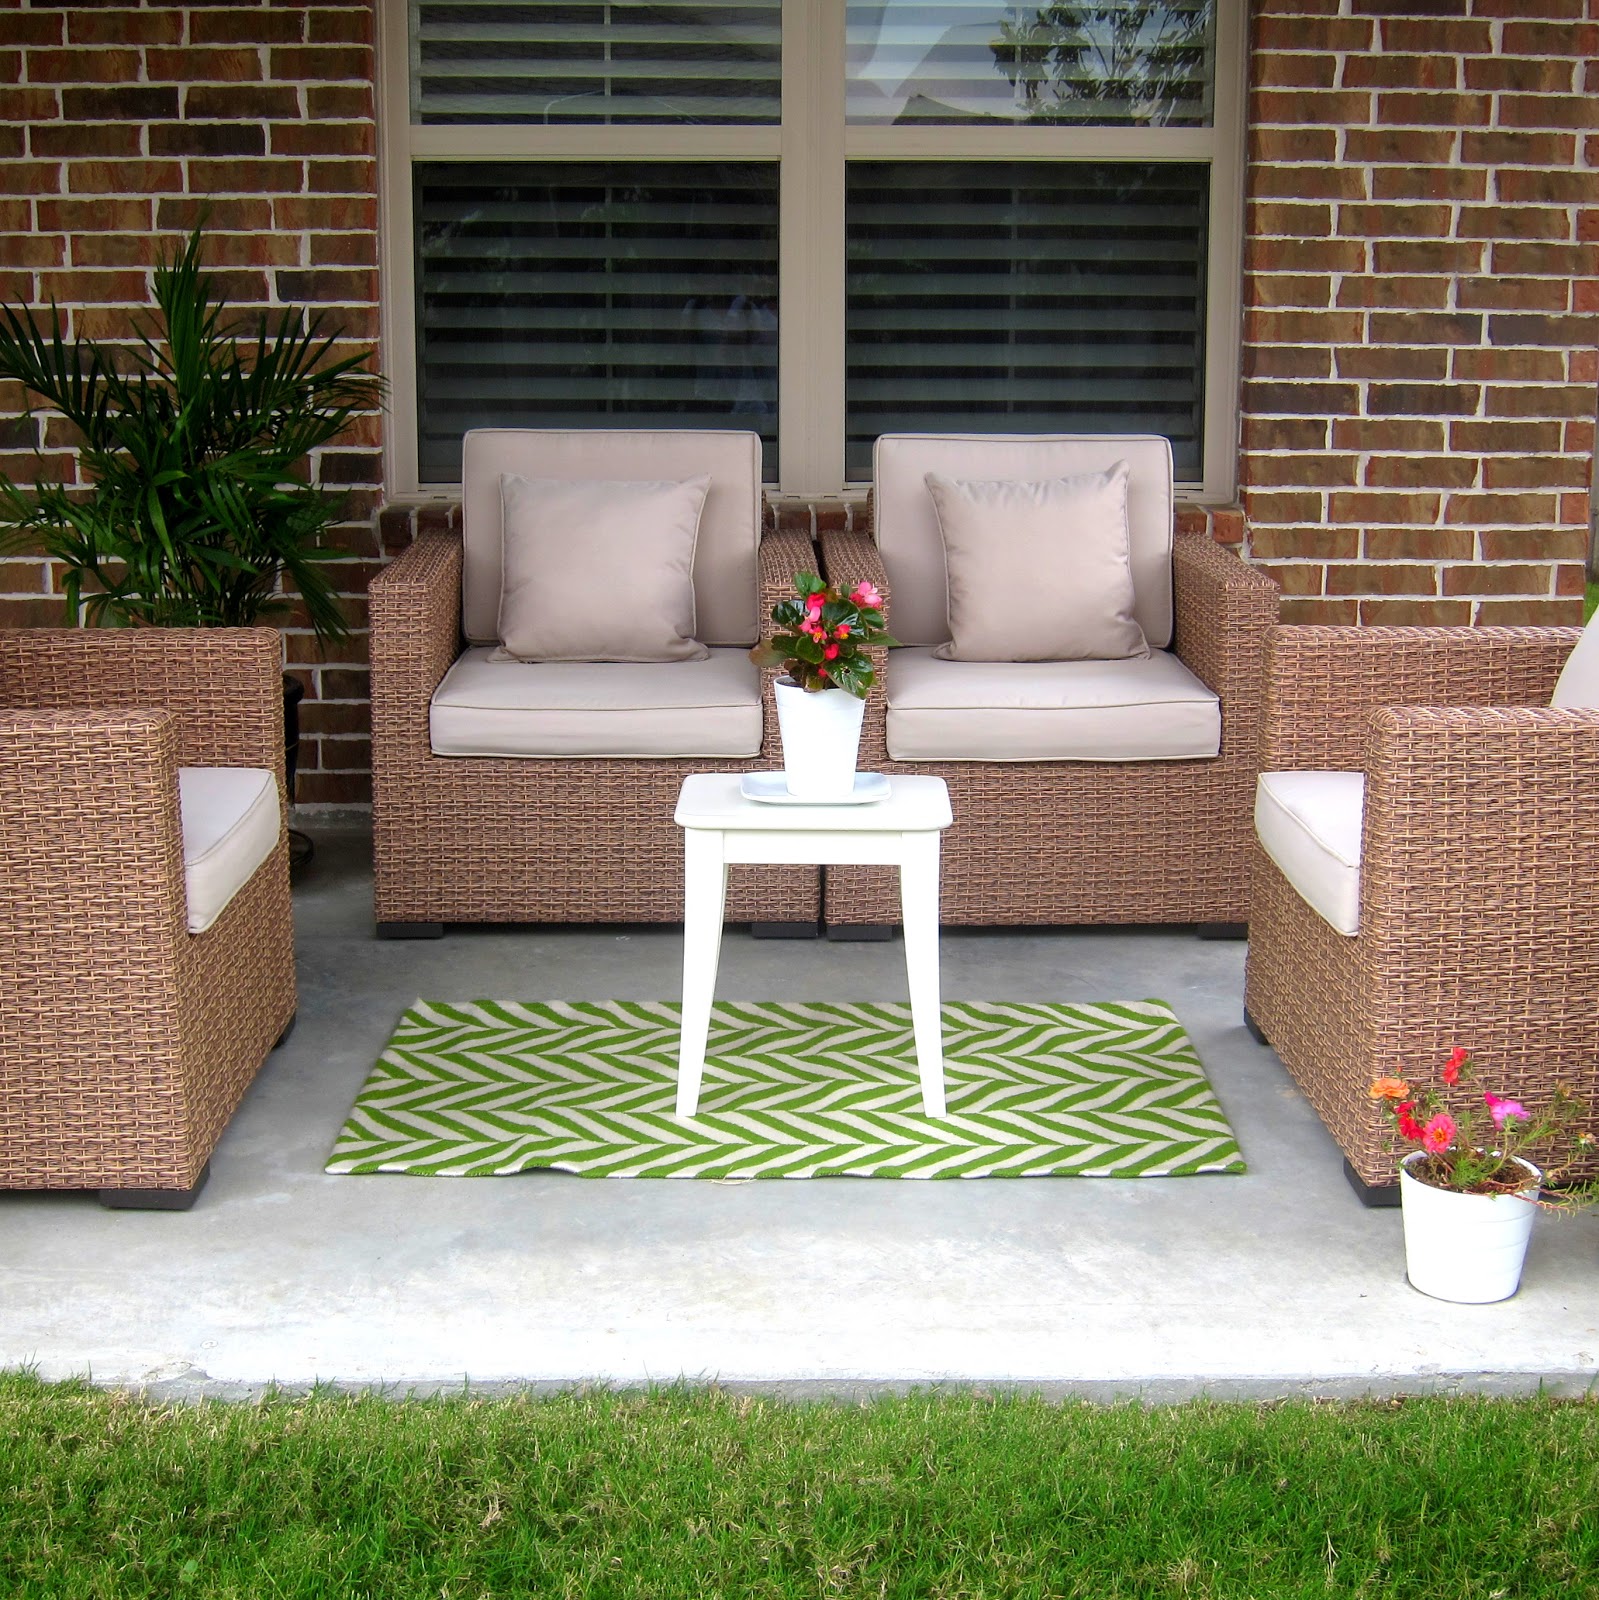 Patio rug decor ideas patio rugs elegant wicker patio furniture with cushions and  chevron AFUNSCM